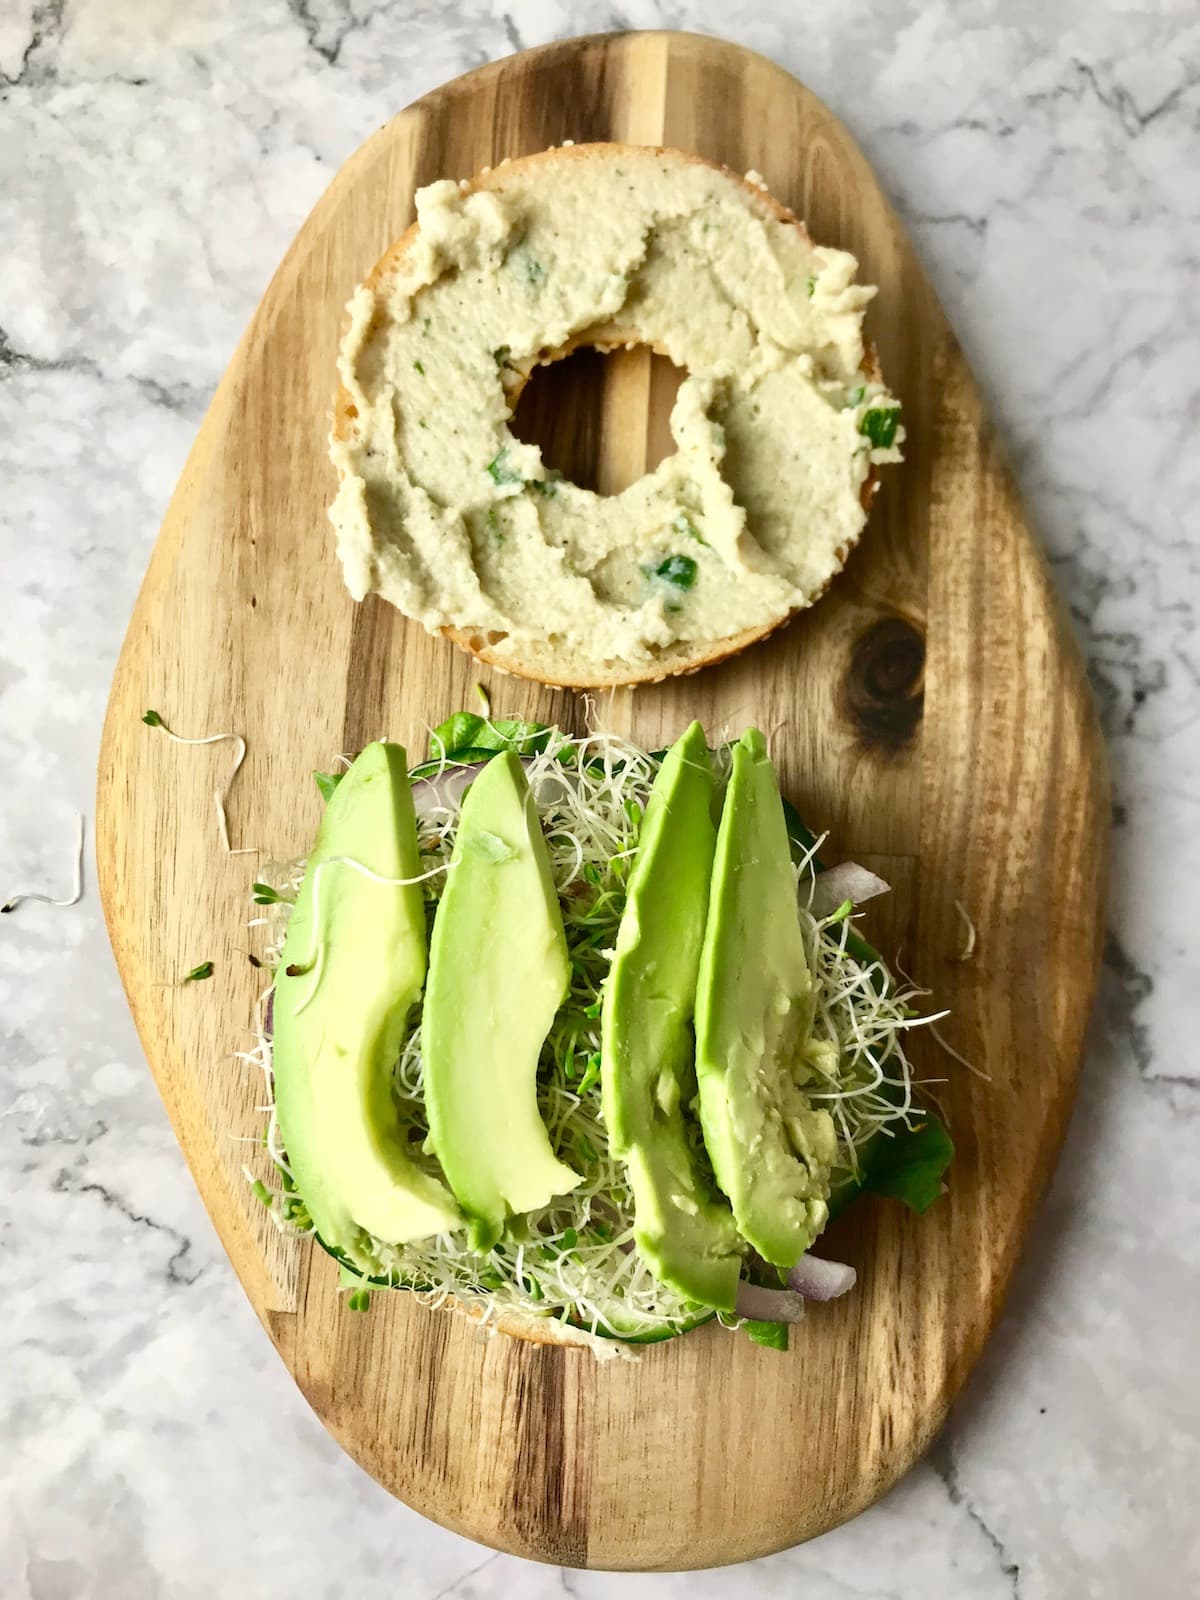 A bagel slice topped with cream cheese and another slice topped with onion, sprouts, and avocado.